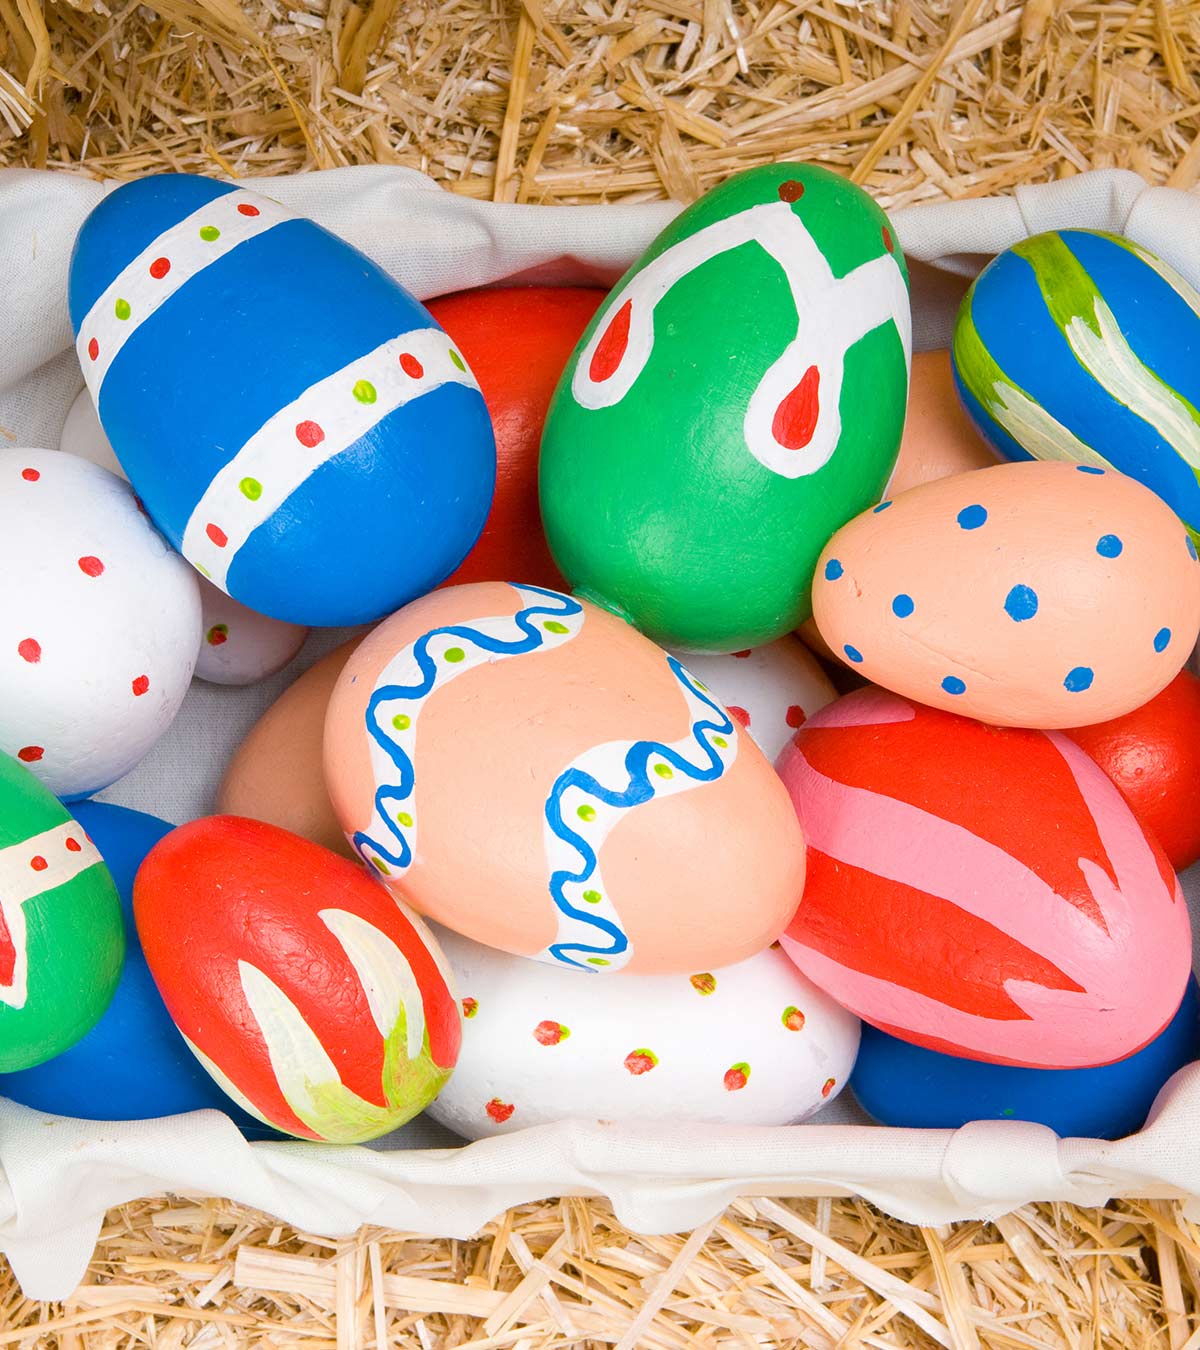 20.Amazing Egg Craft Ideas For Kids Of All Ages